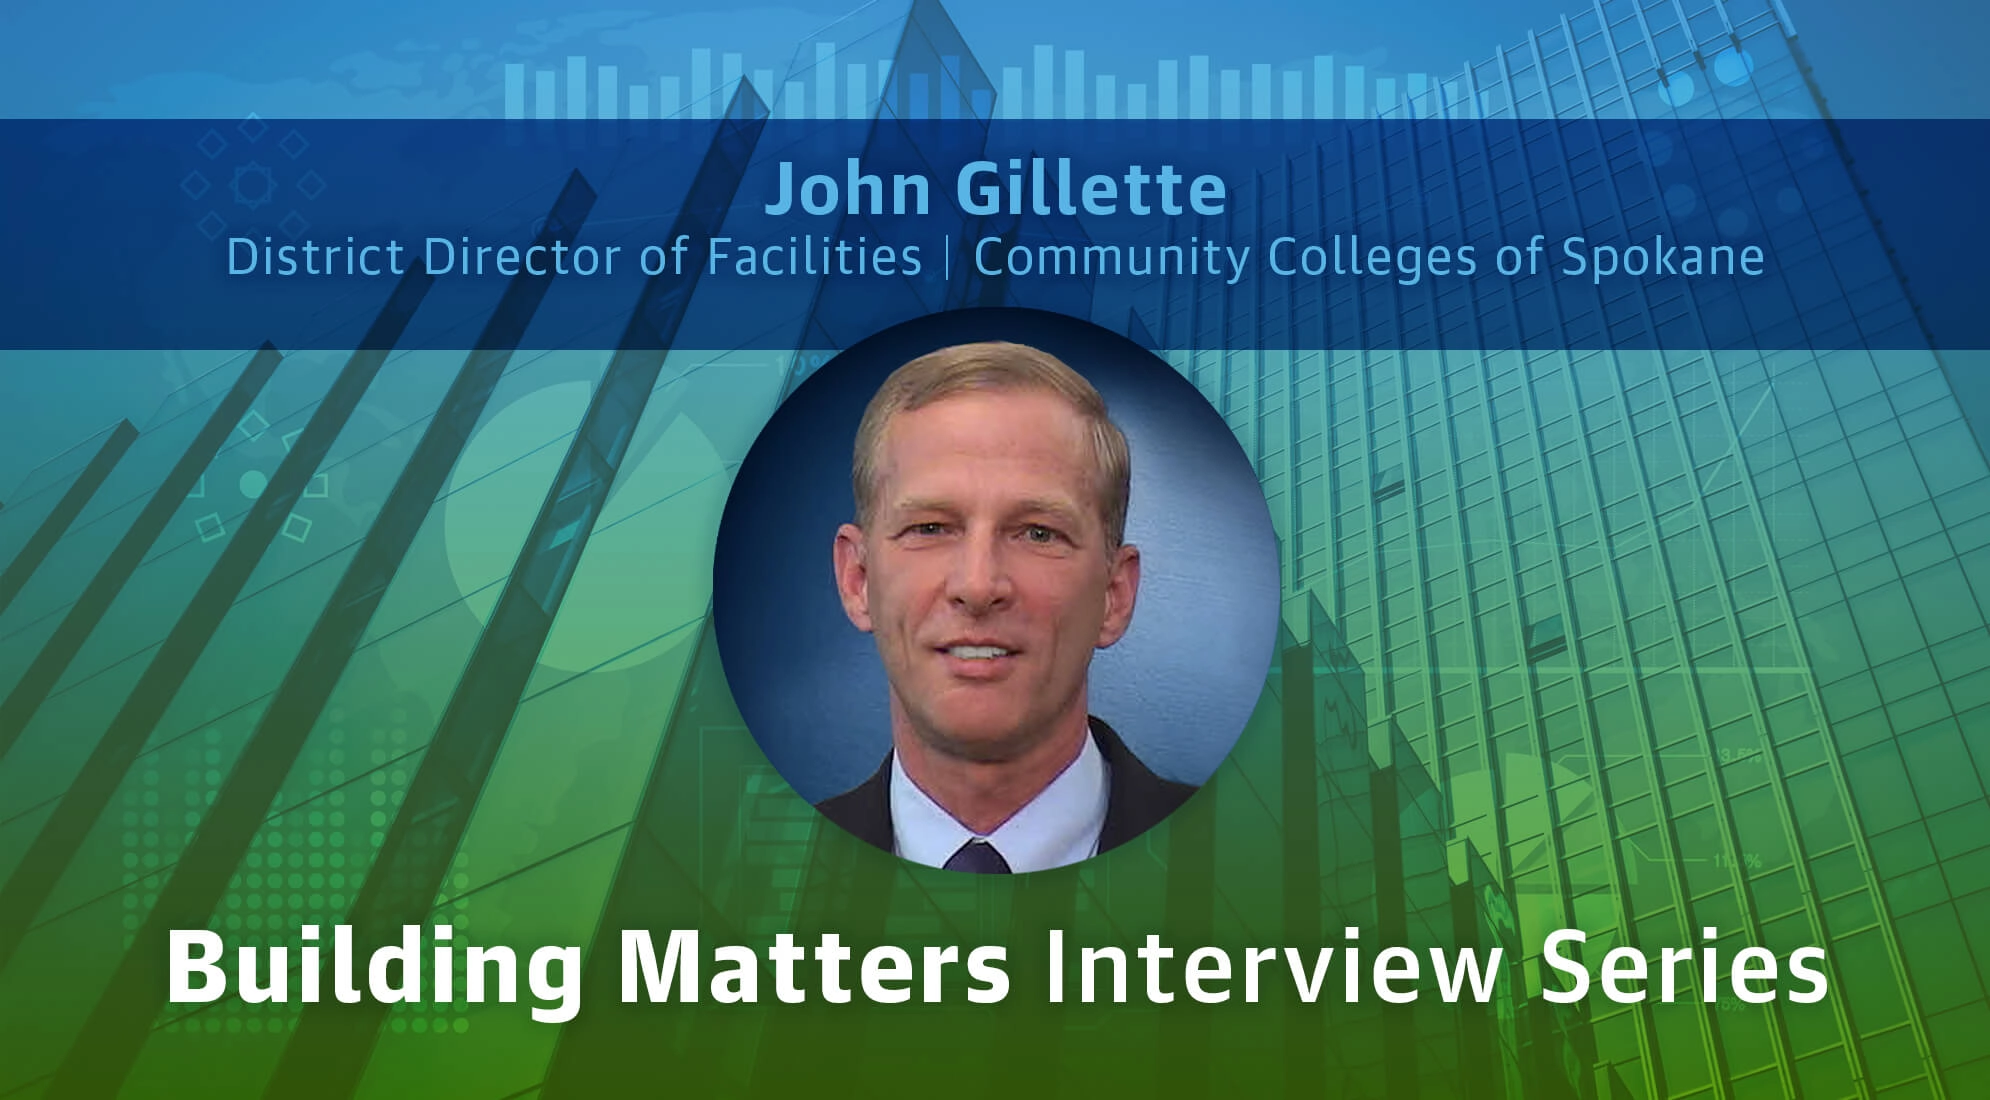 Community College Facilities Insights from John Gillette 2